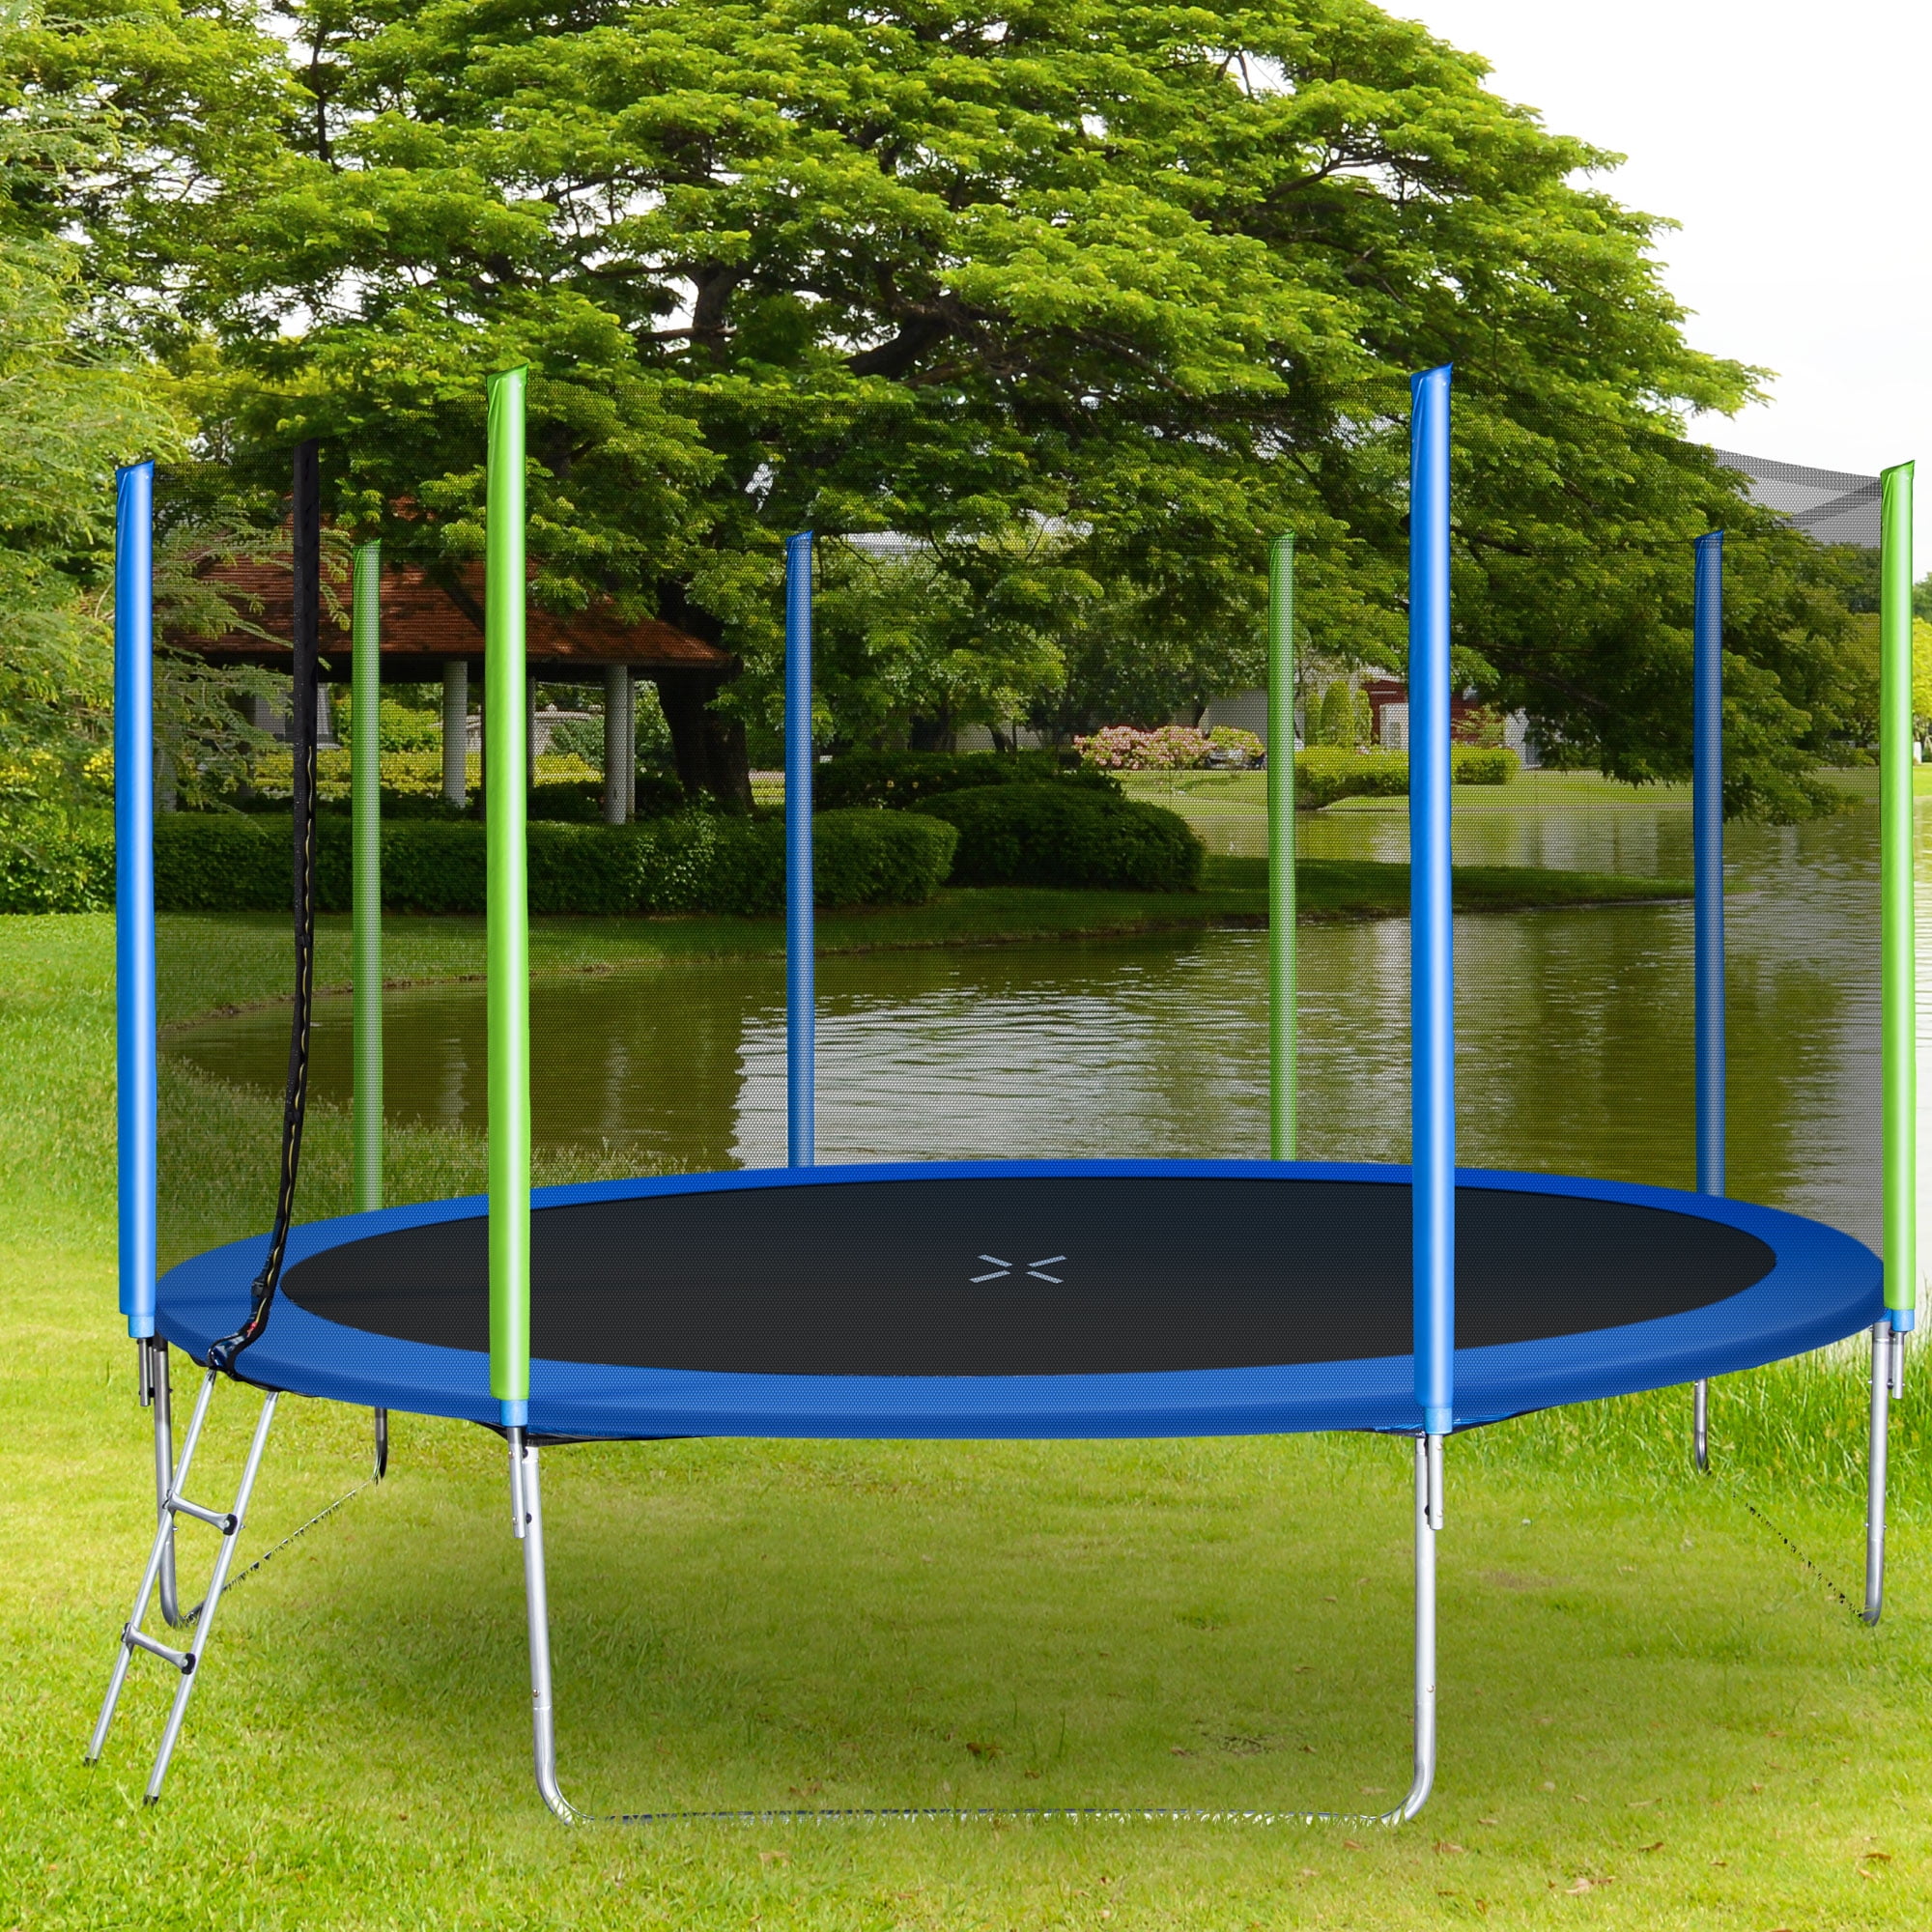 Details about   12 FT Large Trampoline w/Safe Enclosure Net Jumping Mat And Spring Cover Padding 